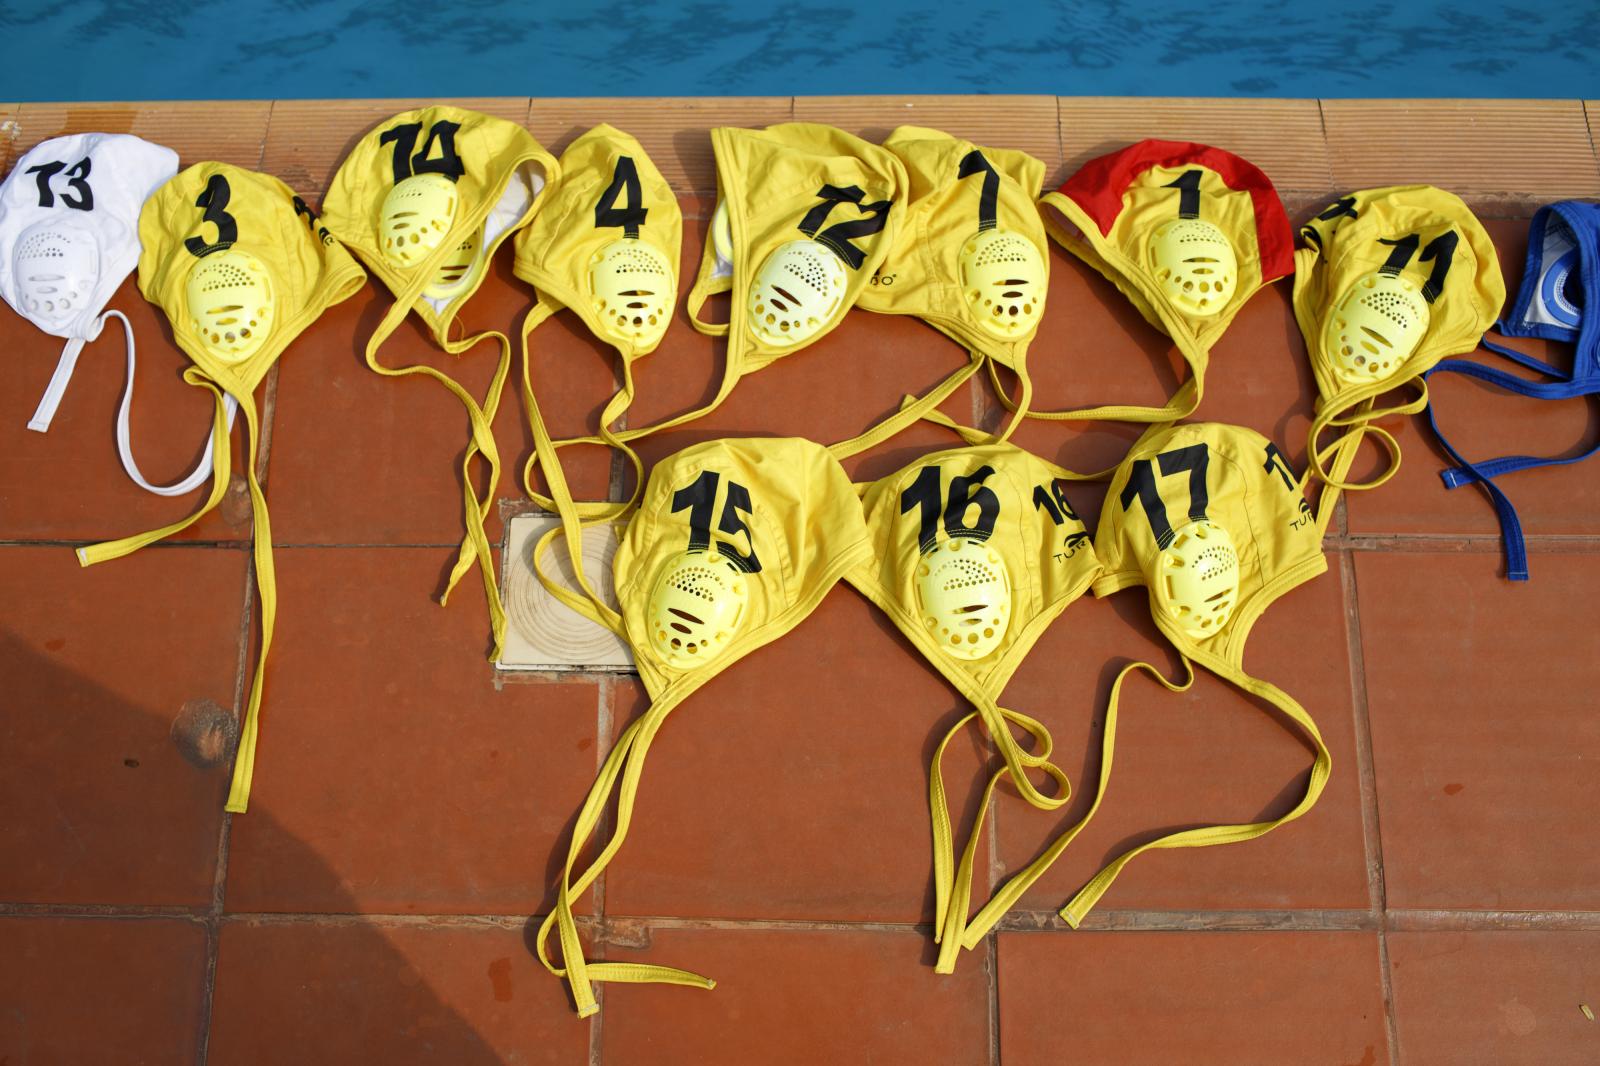 Water polo caps are displayed b...e University of Ghana in Accra.